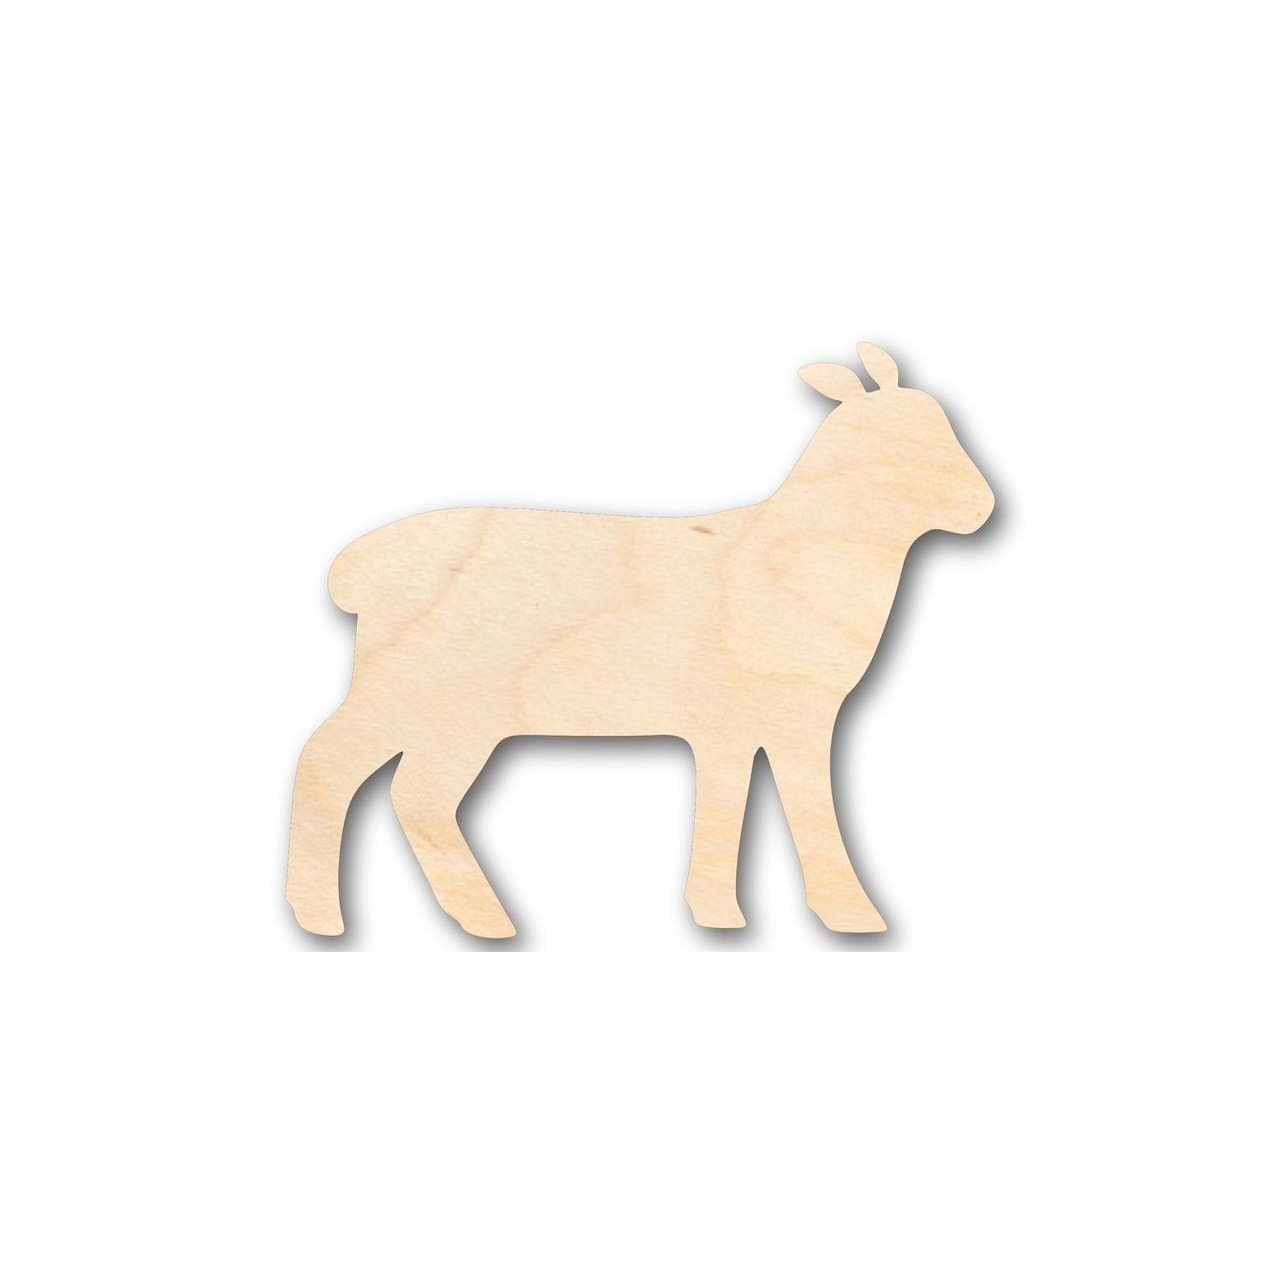 10x Wooden Sheep Standing Plain Craft Shapes 3mm Plywood